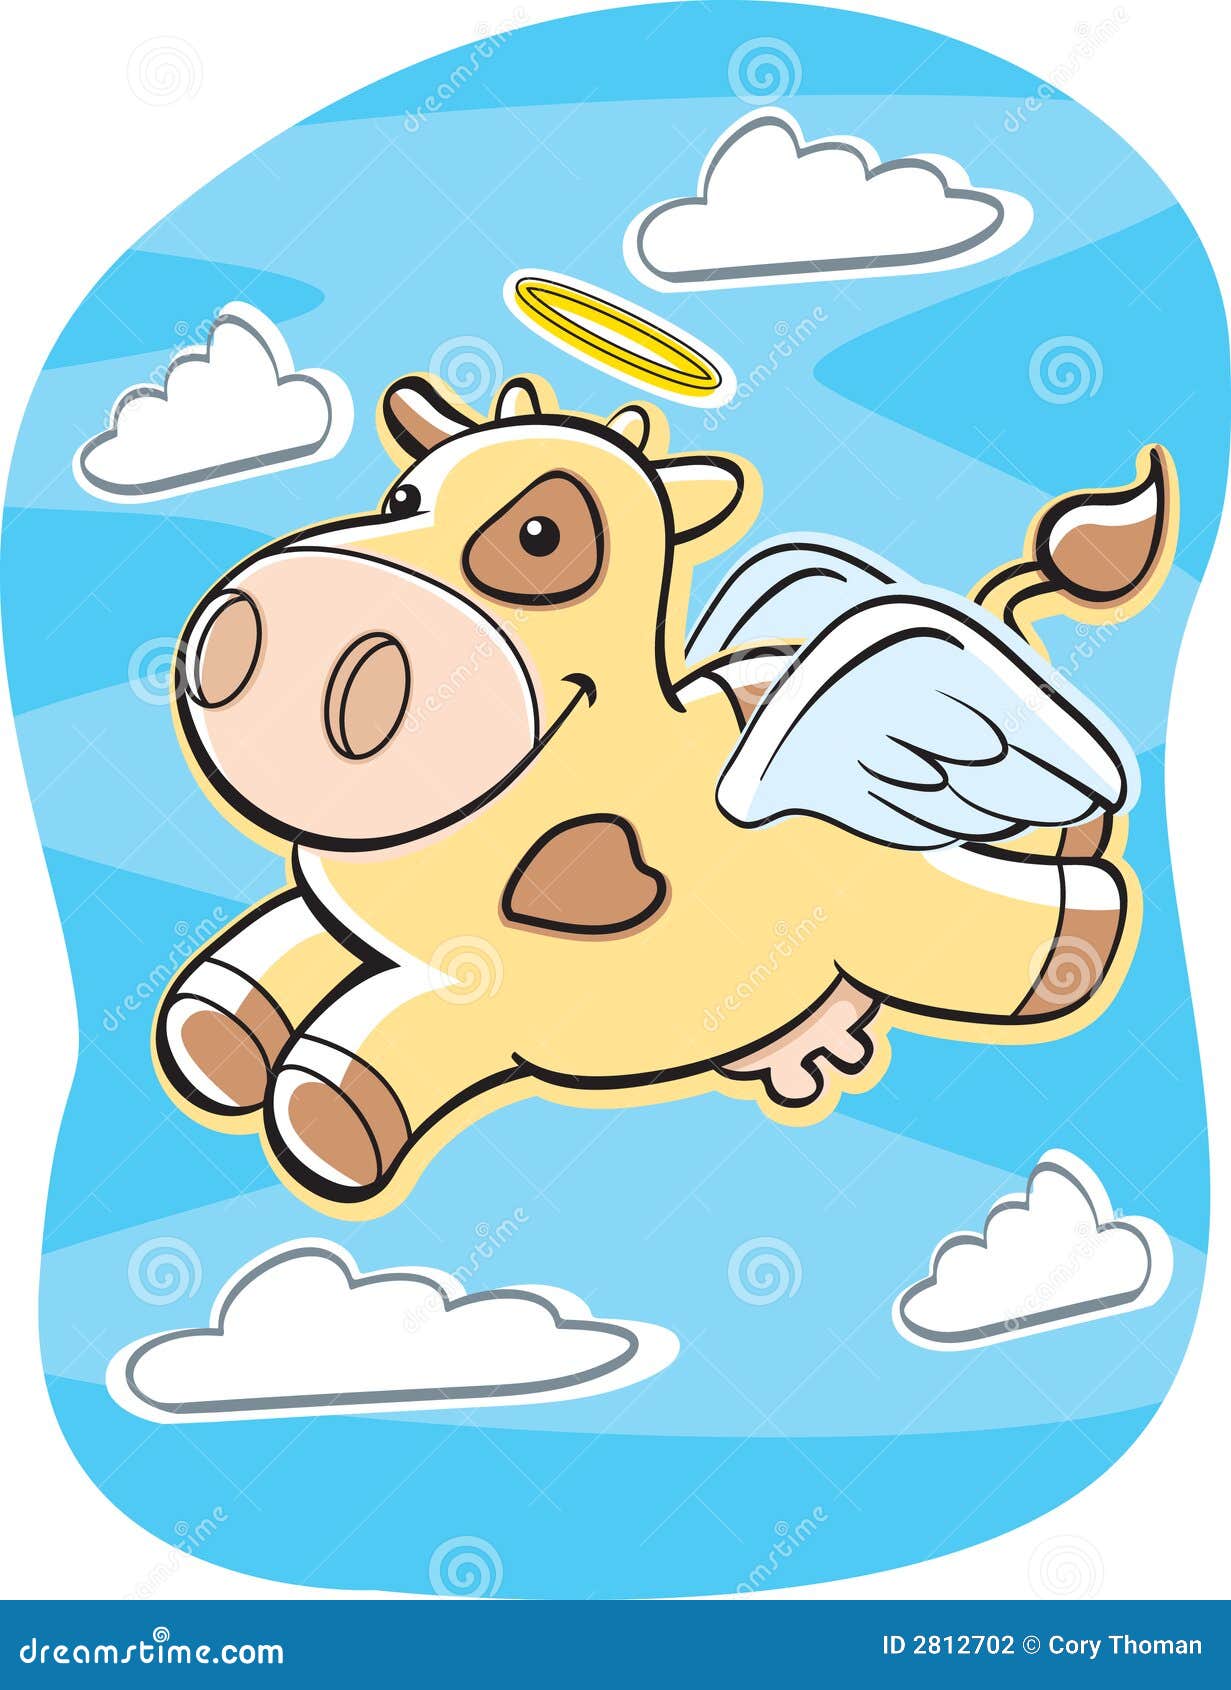 holy cow clip art free - photo #35